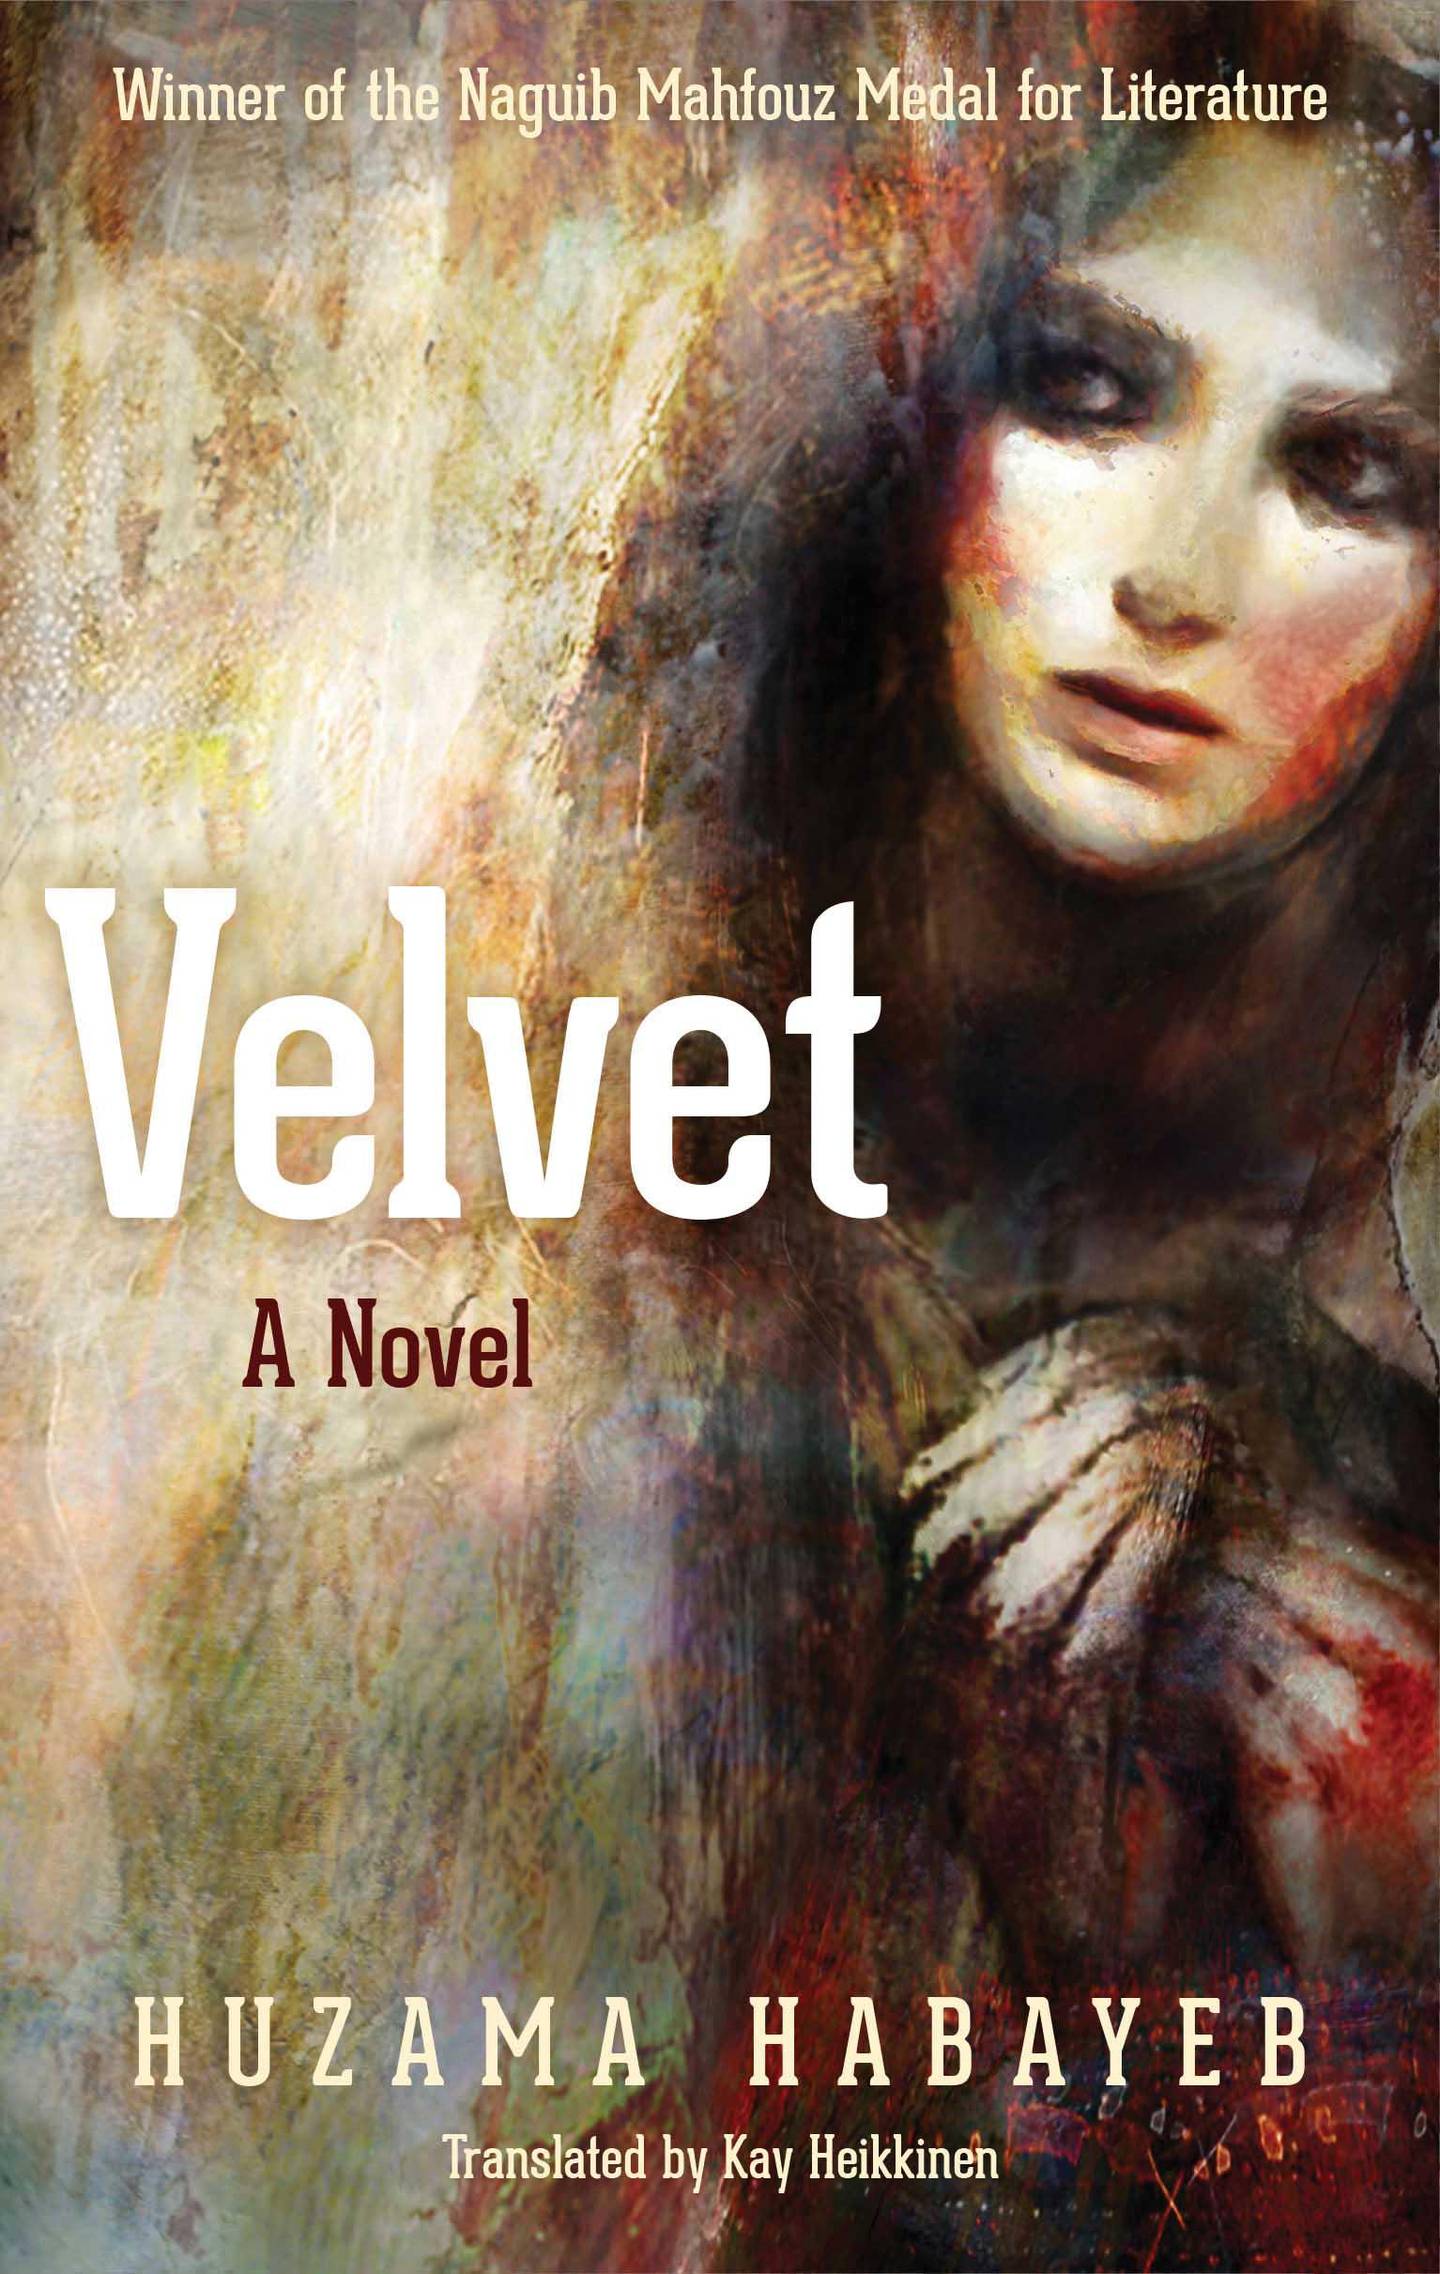 Velvet by Huzama Habayeb, Translated by Kay Heikkinen published by Hoopoe Fiction. Courtesy American University in Cairo Press